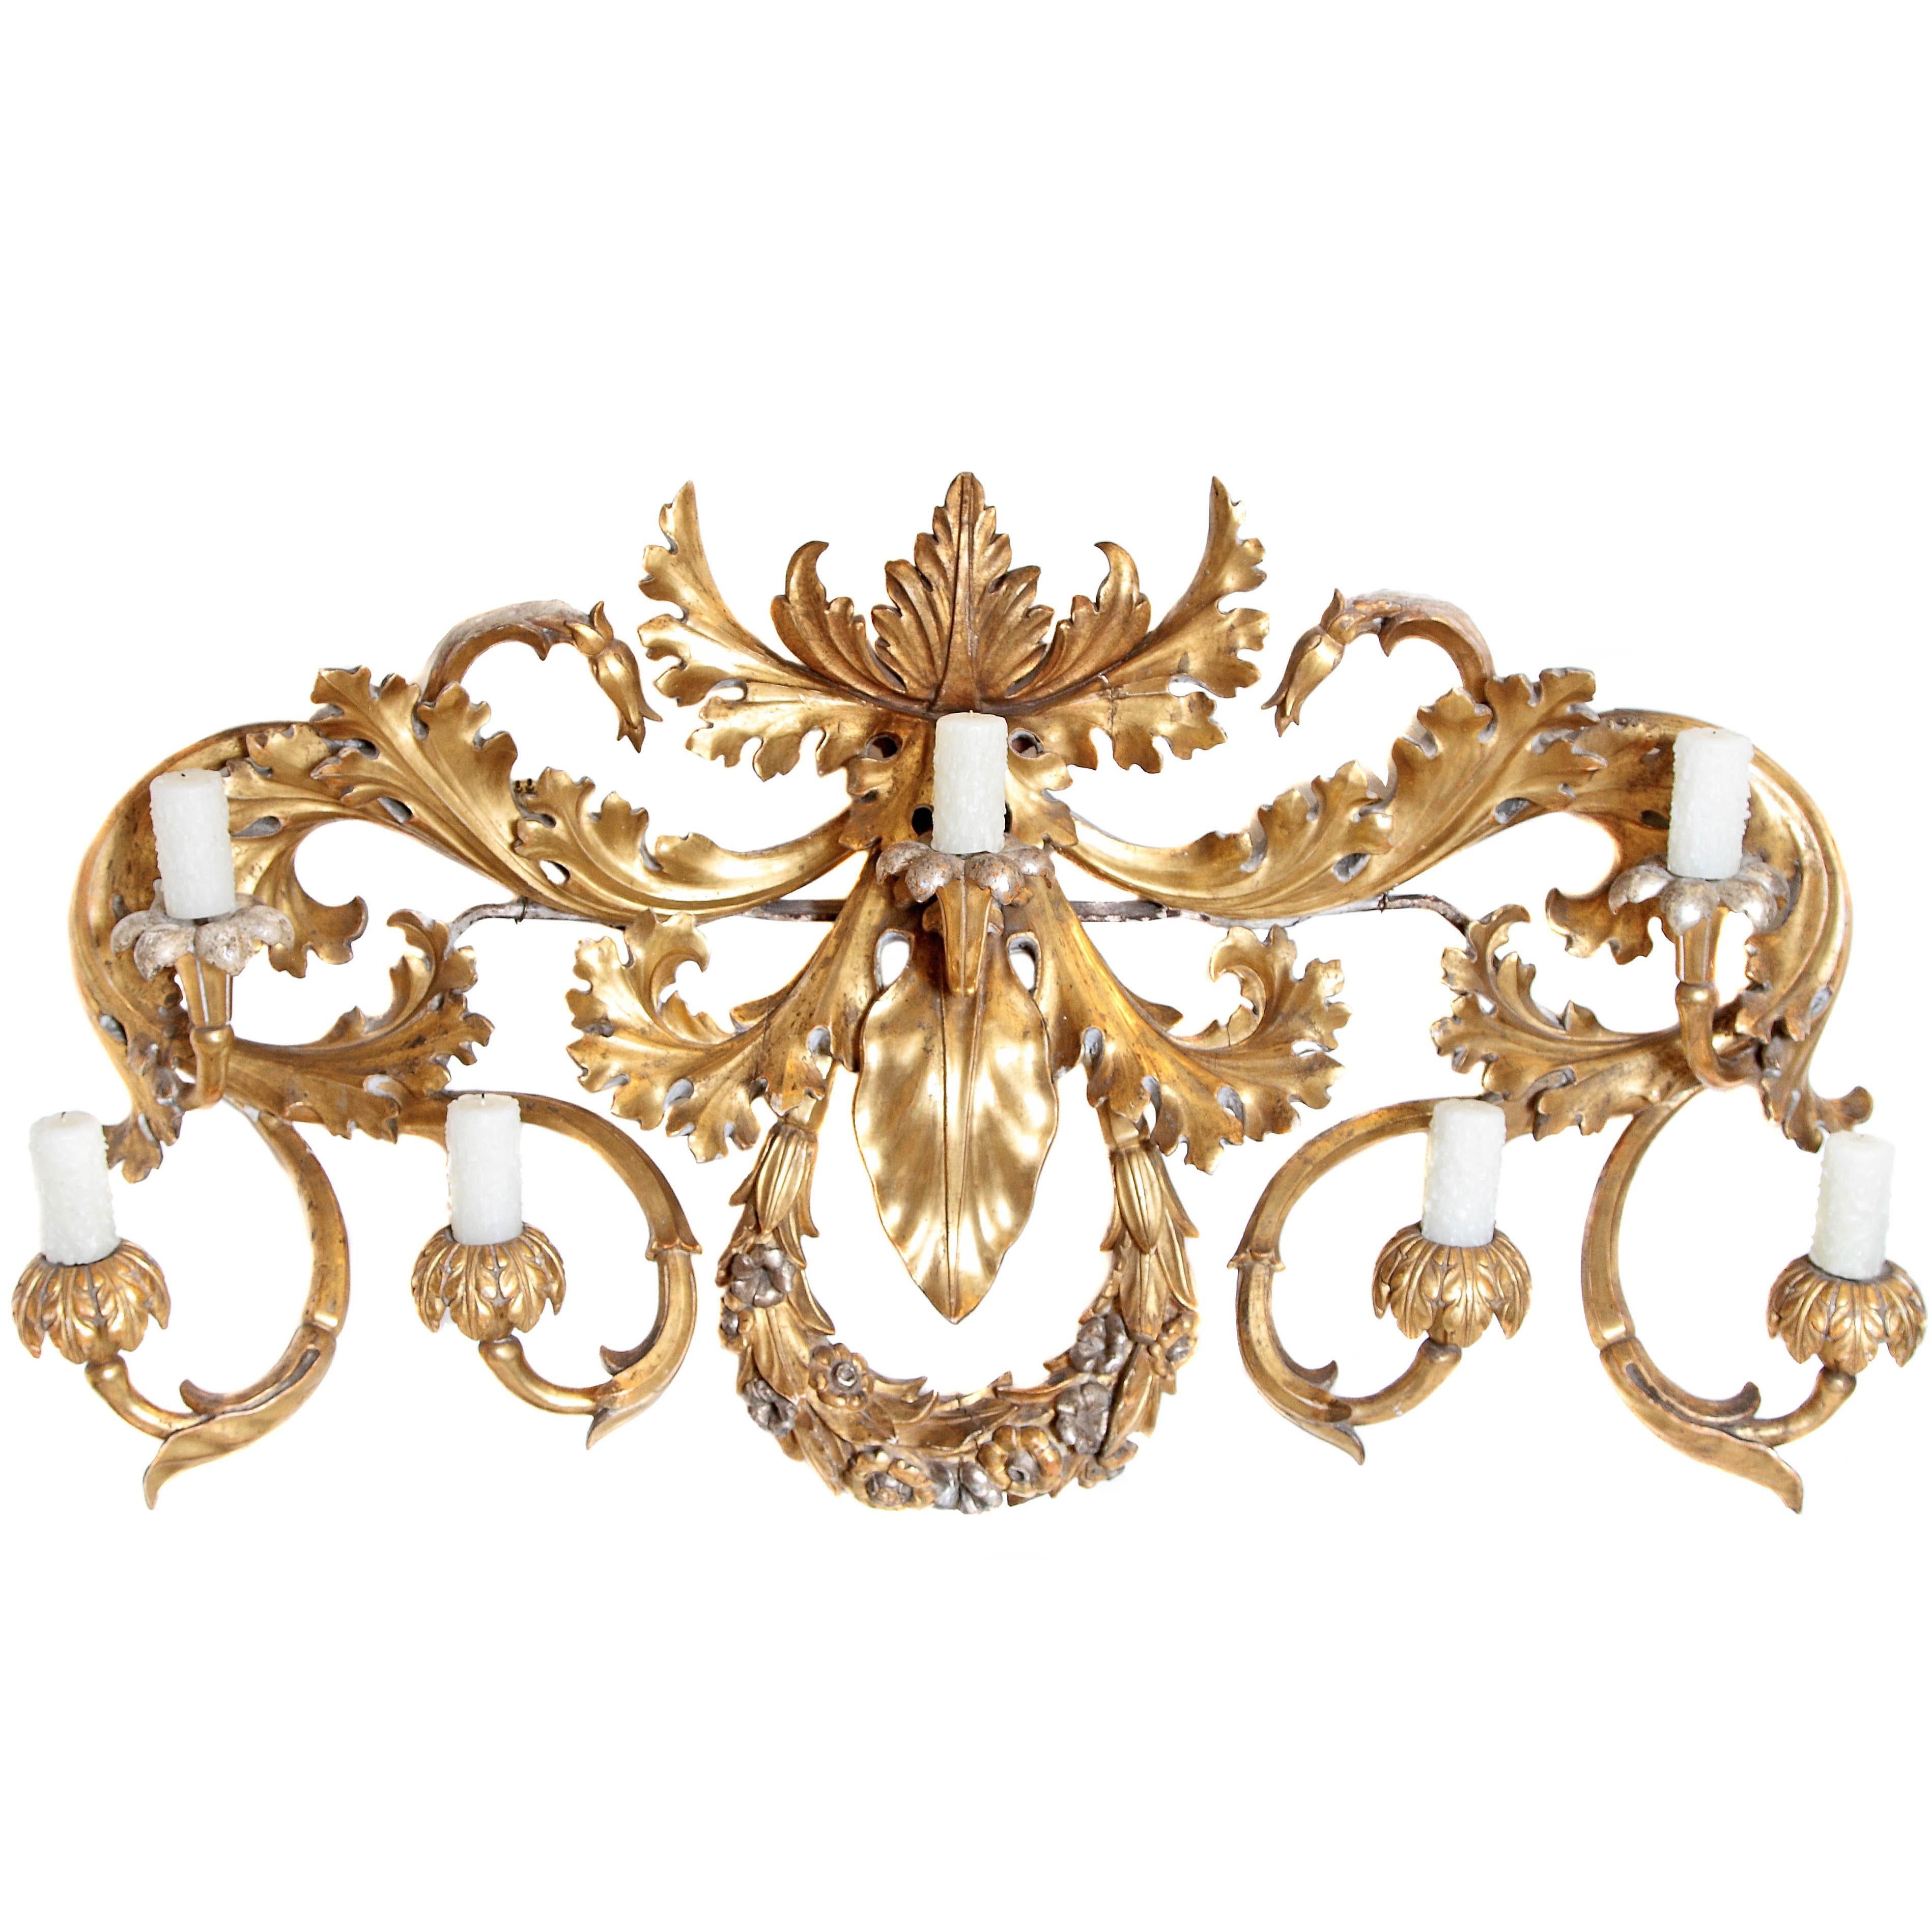 Oversized Italian Baroque Style Seven-Arm Gilt and Silvered Wood Wall Sconce